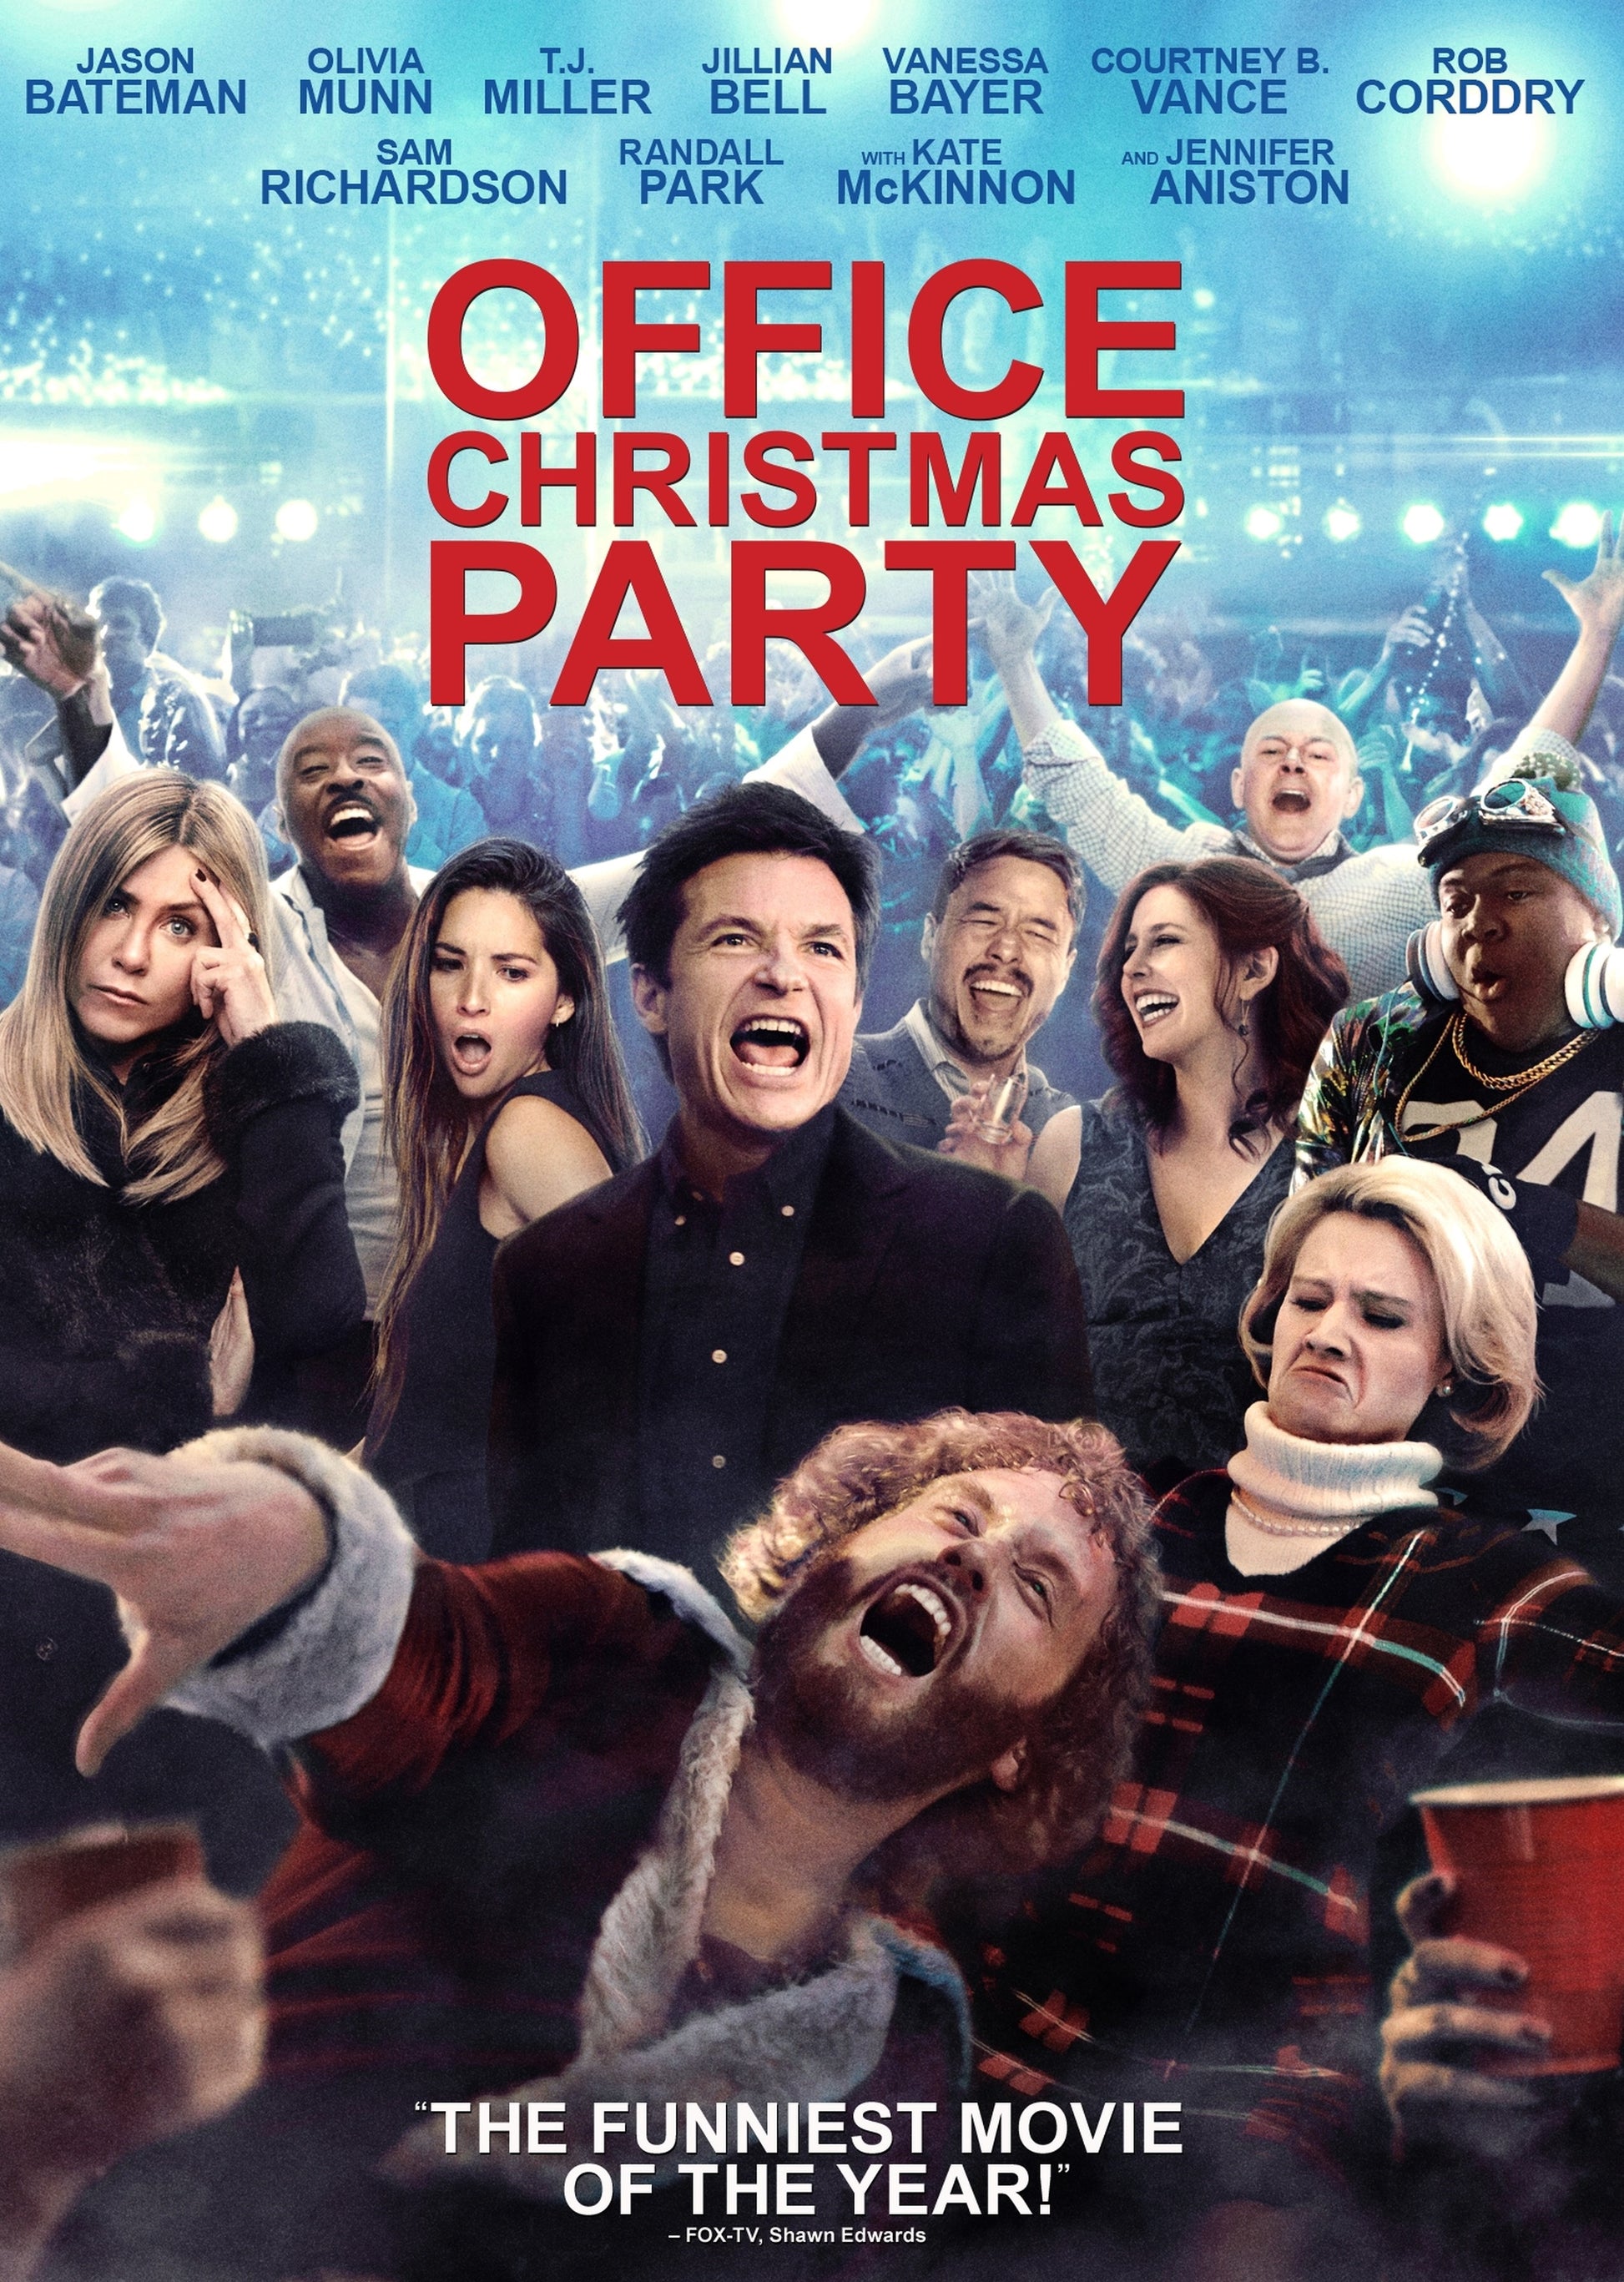 Office Christmas Party cover art